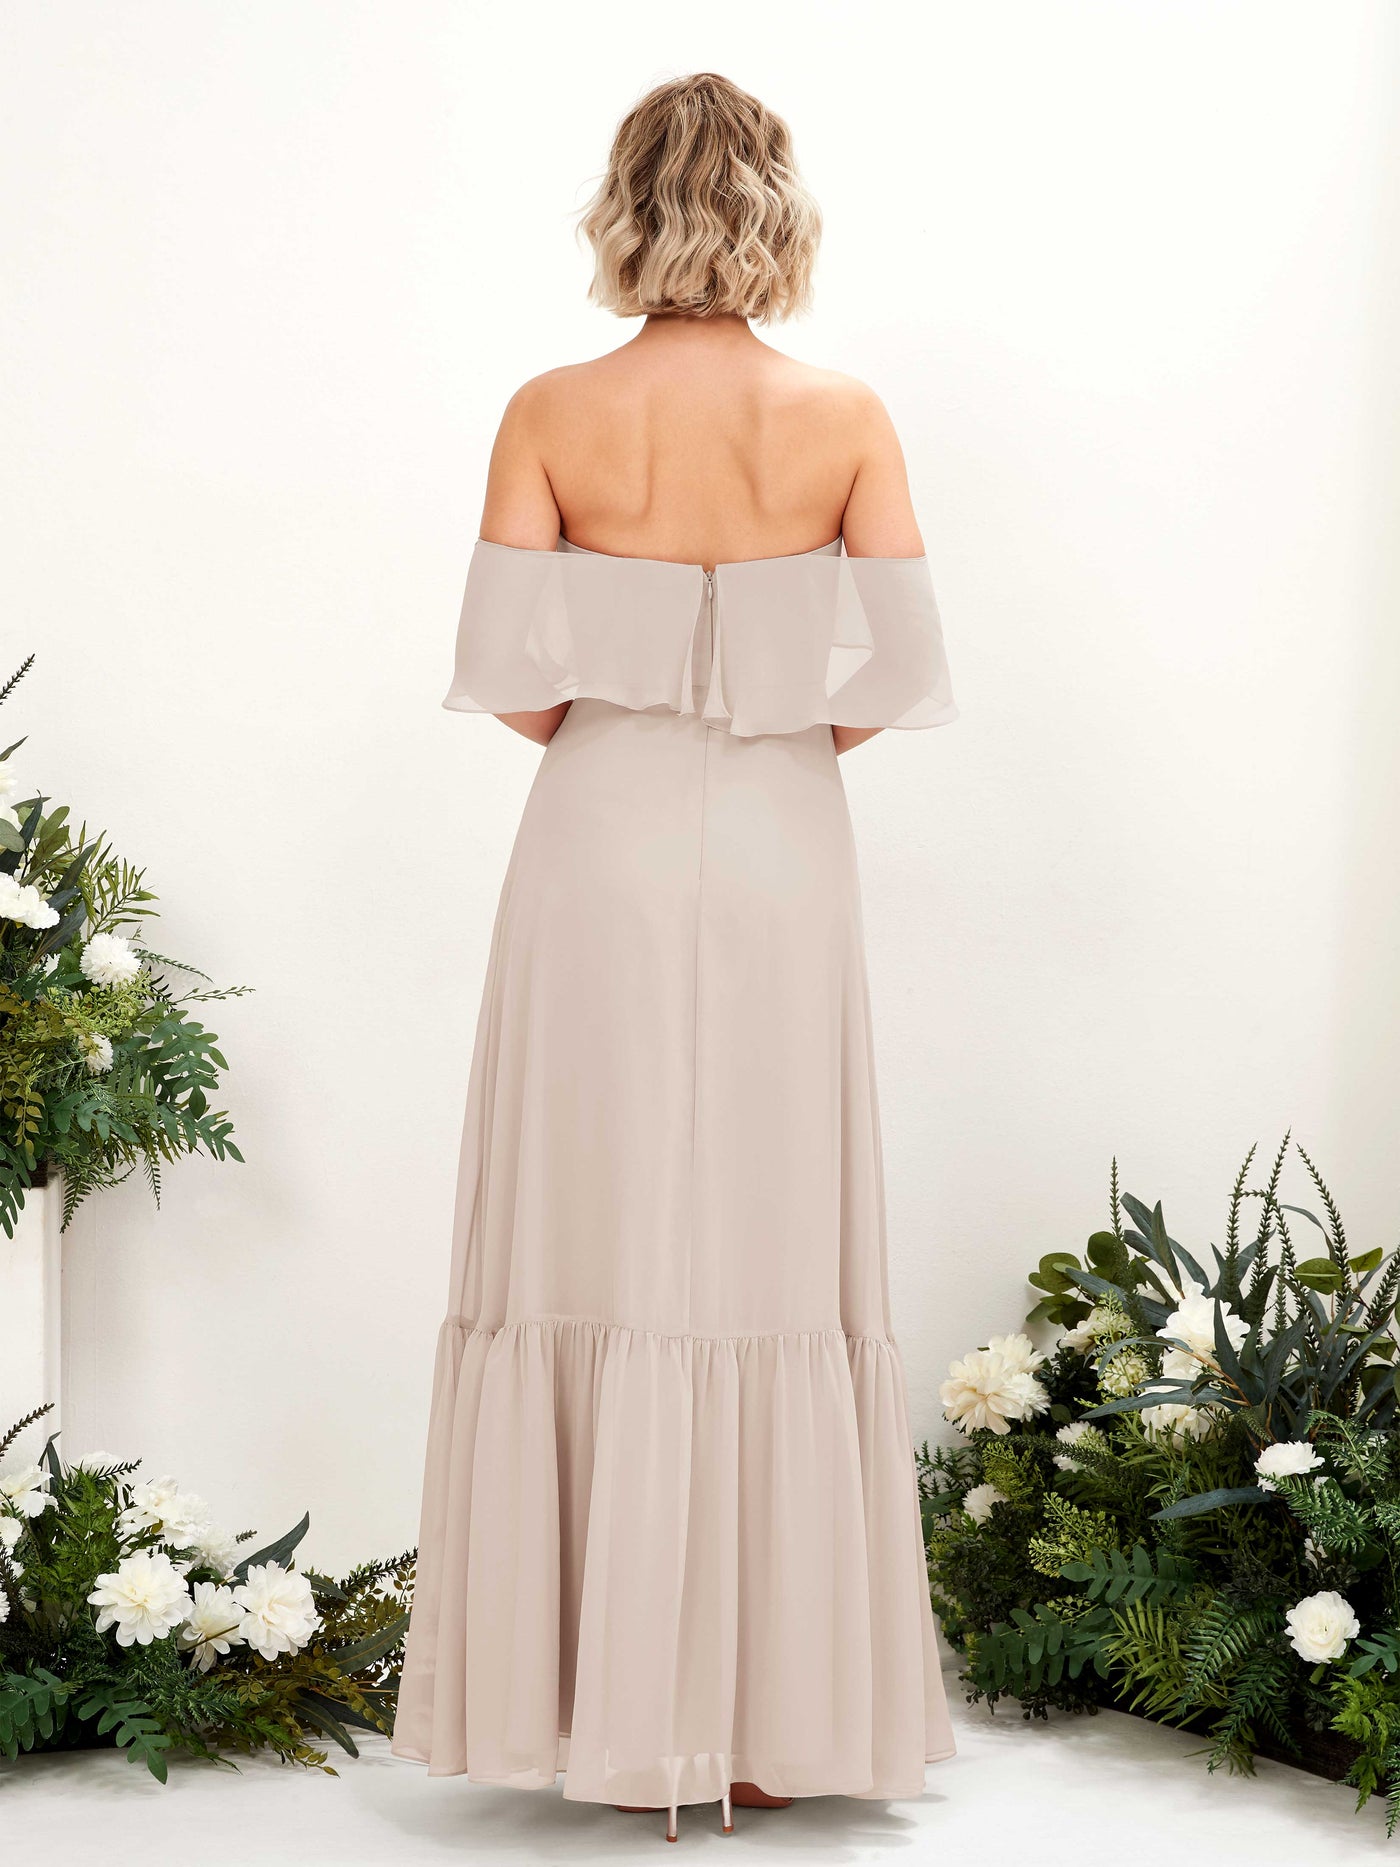 Champagne Bridesmaid Dresses Bridesmaid Dress A-line Chiffon Off Shoulder Full Length Sleeveless Wedding Party Dress (81224516)#color_champagne